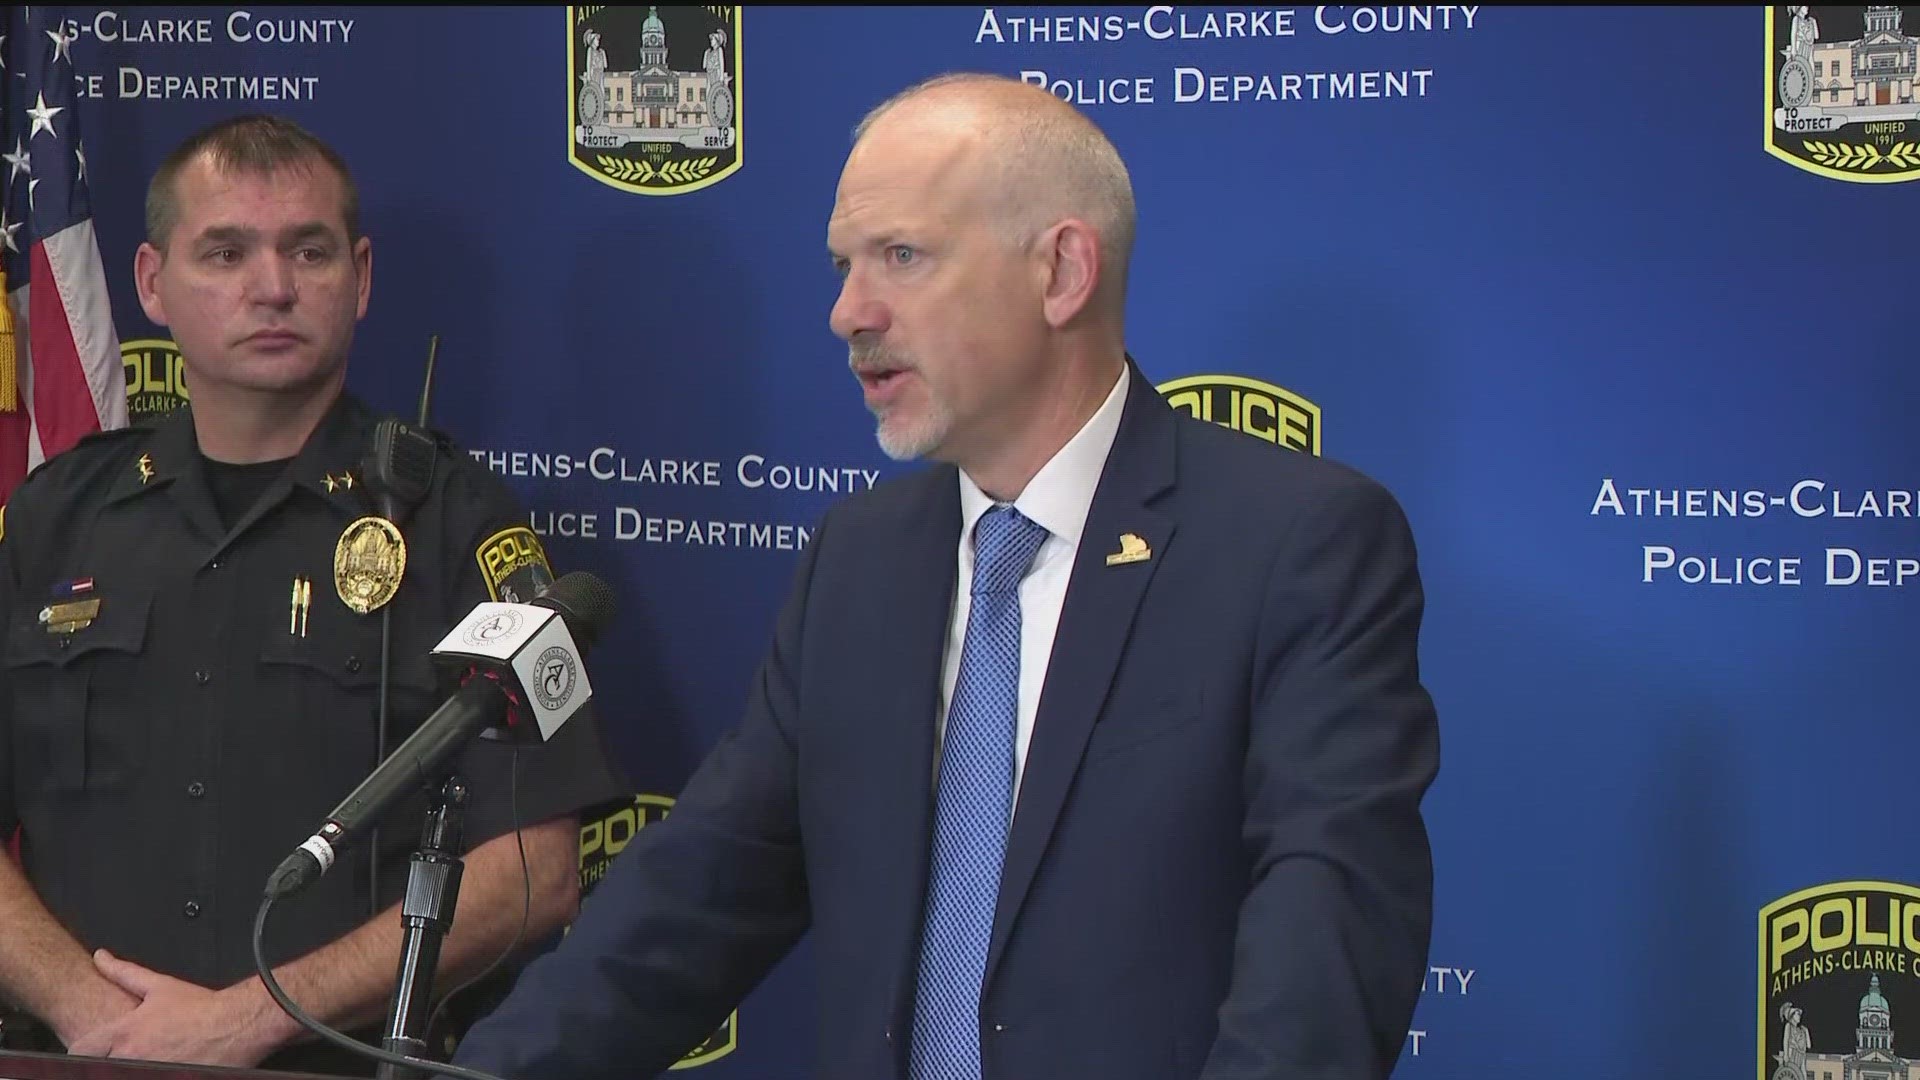 Mayor Kelly Girtz spoke about claims of Athens as a "sanctuary city" with the 2019 resolution in remarks to the press addressing the death of Laken Riley.